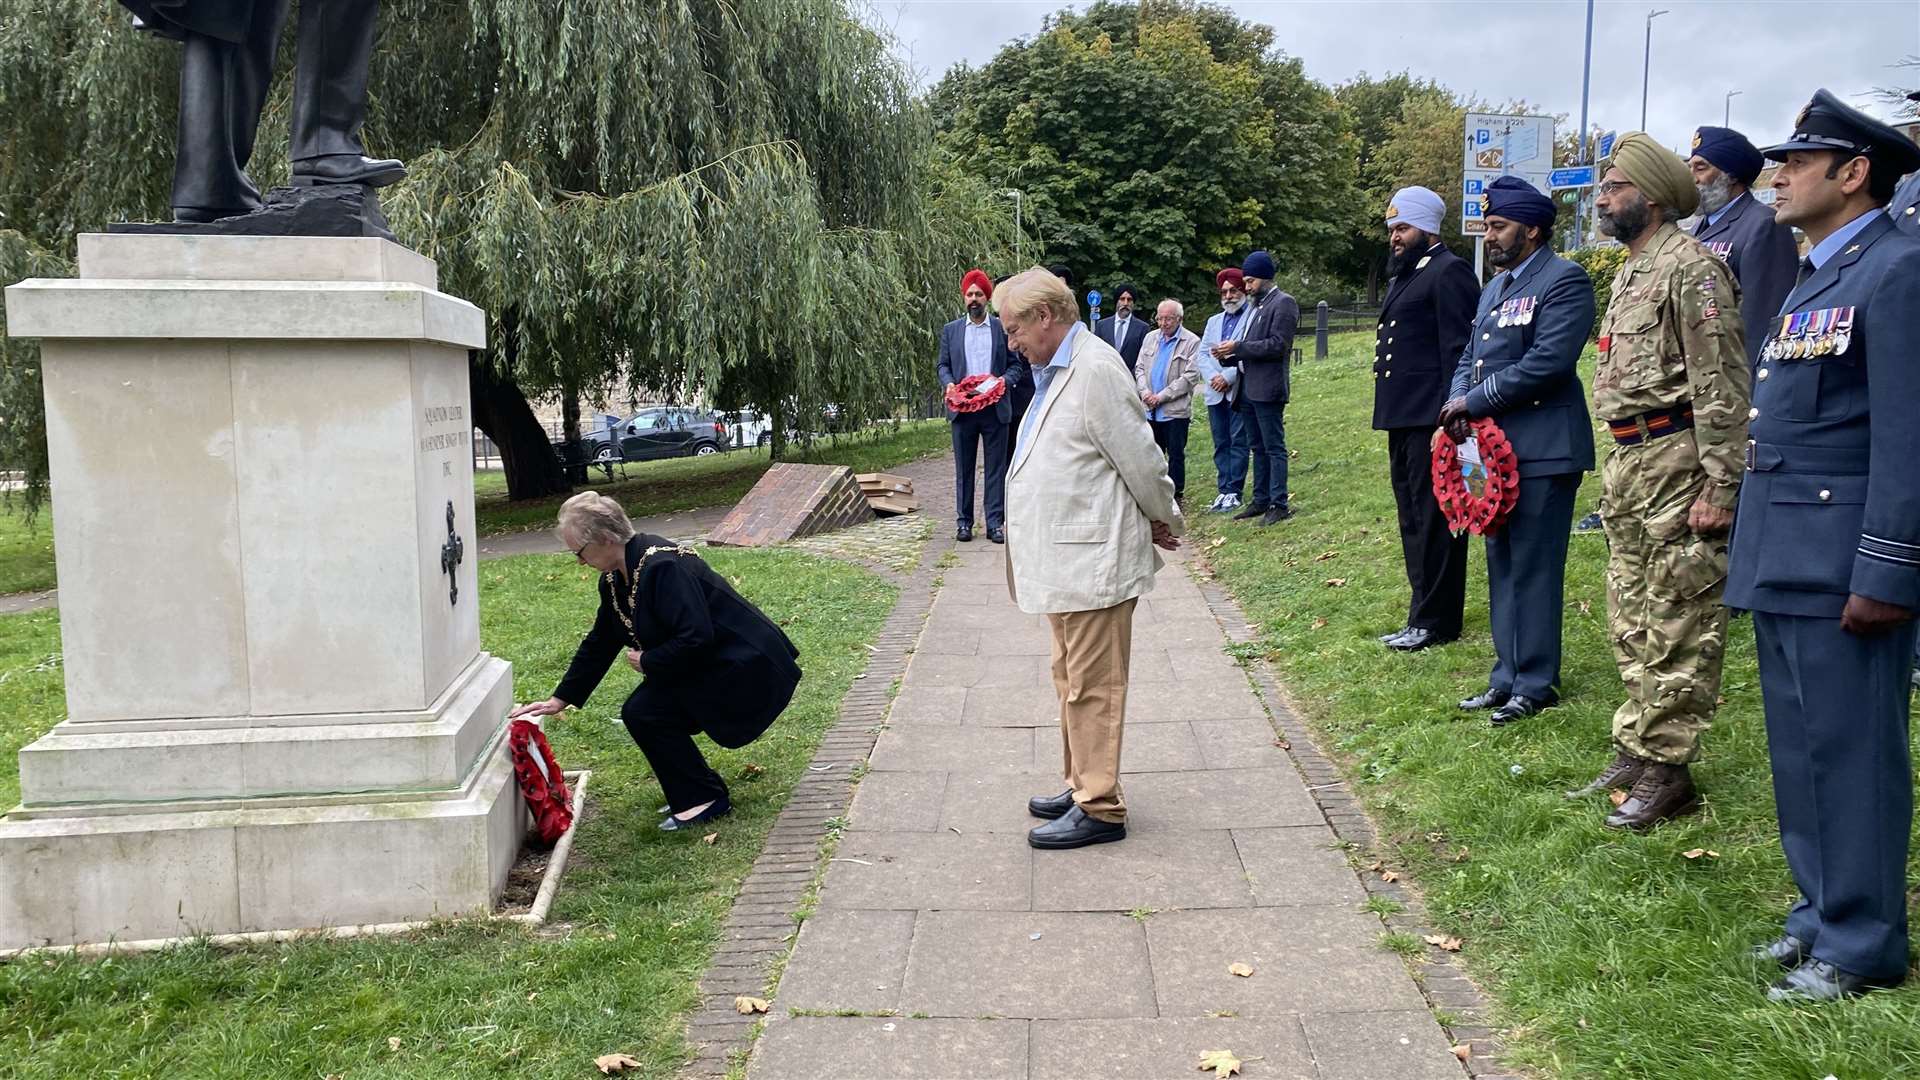 The Mayor of Gravesham, Councillor Lyn Milner laid a wreath. Picture: Jagdev Singh Virdee